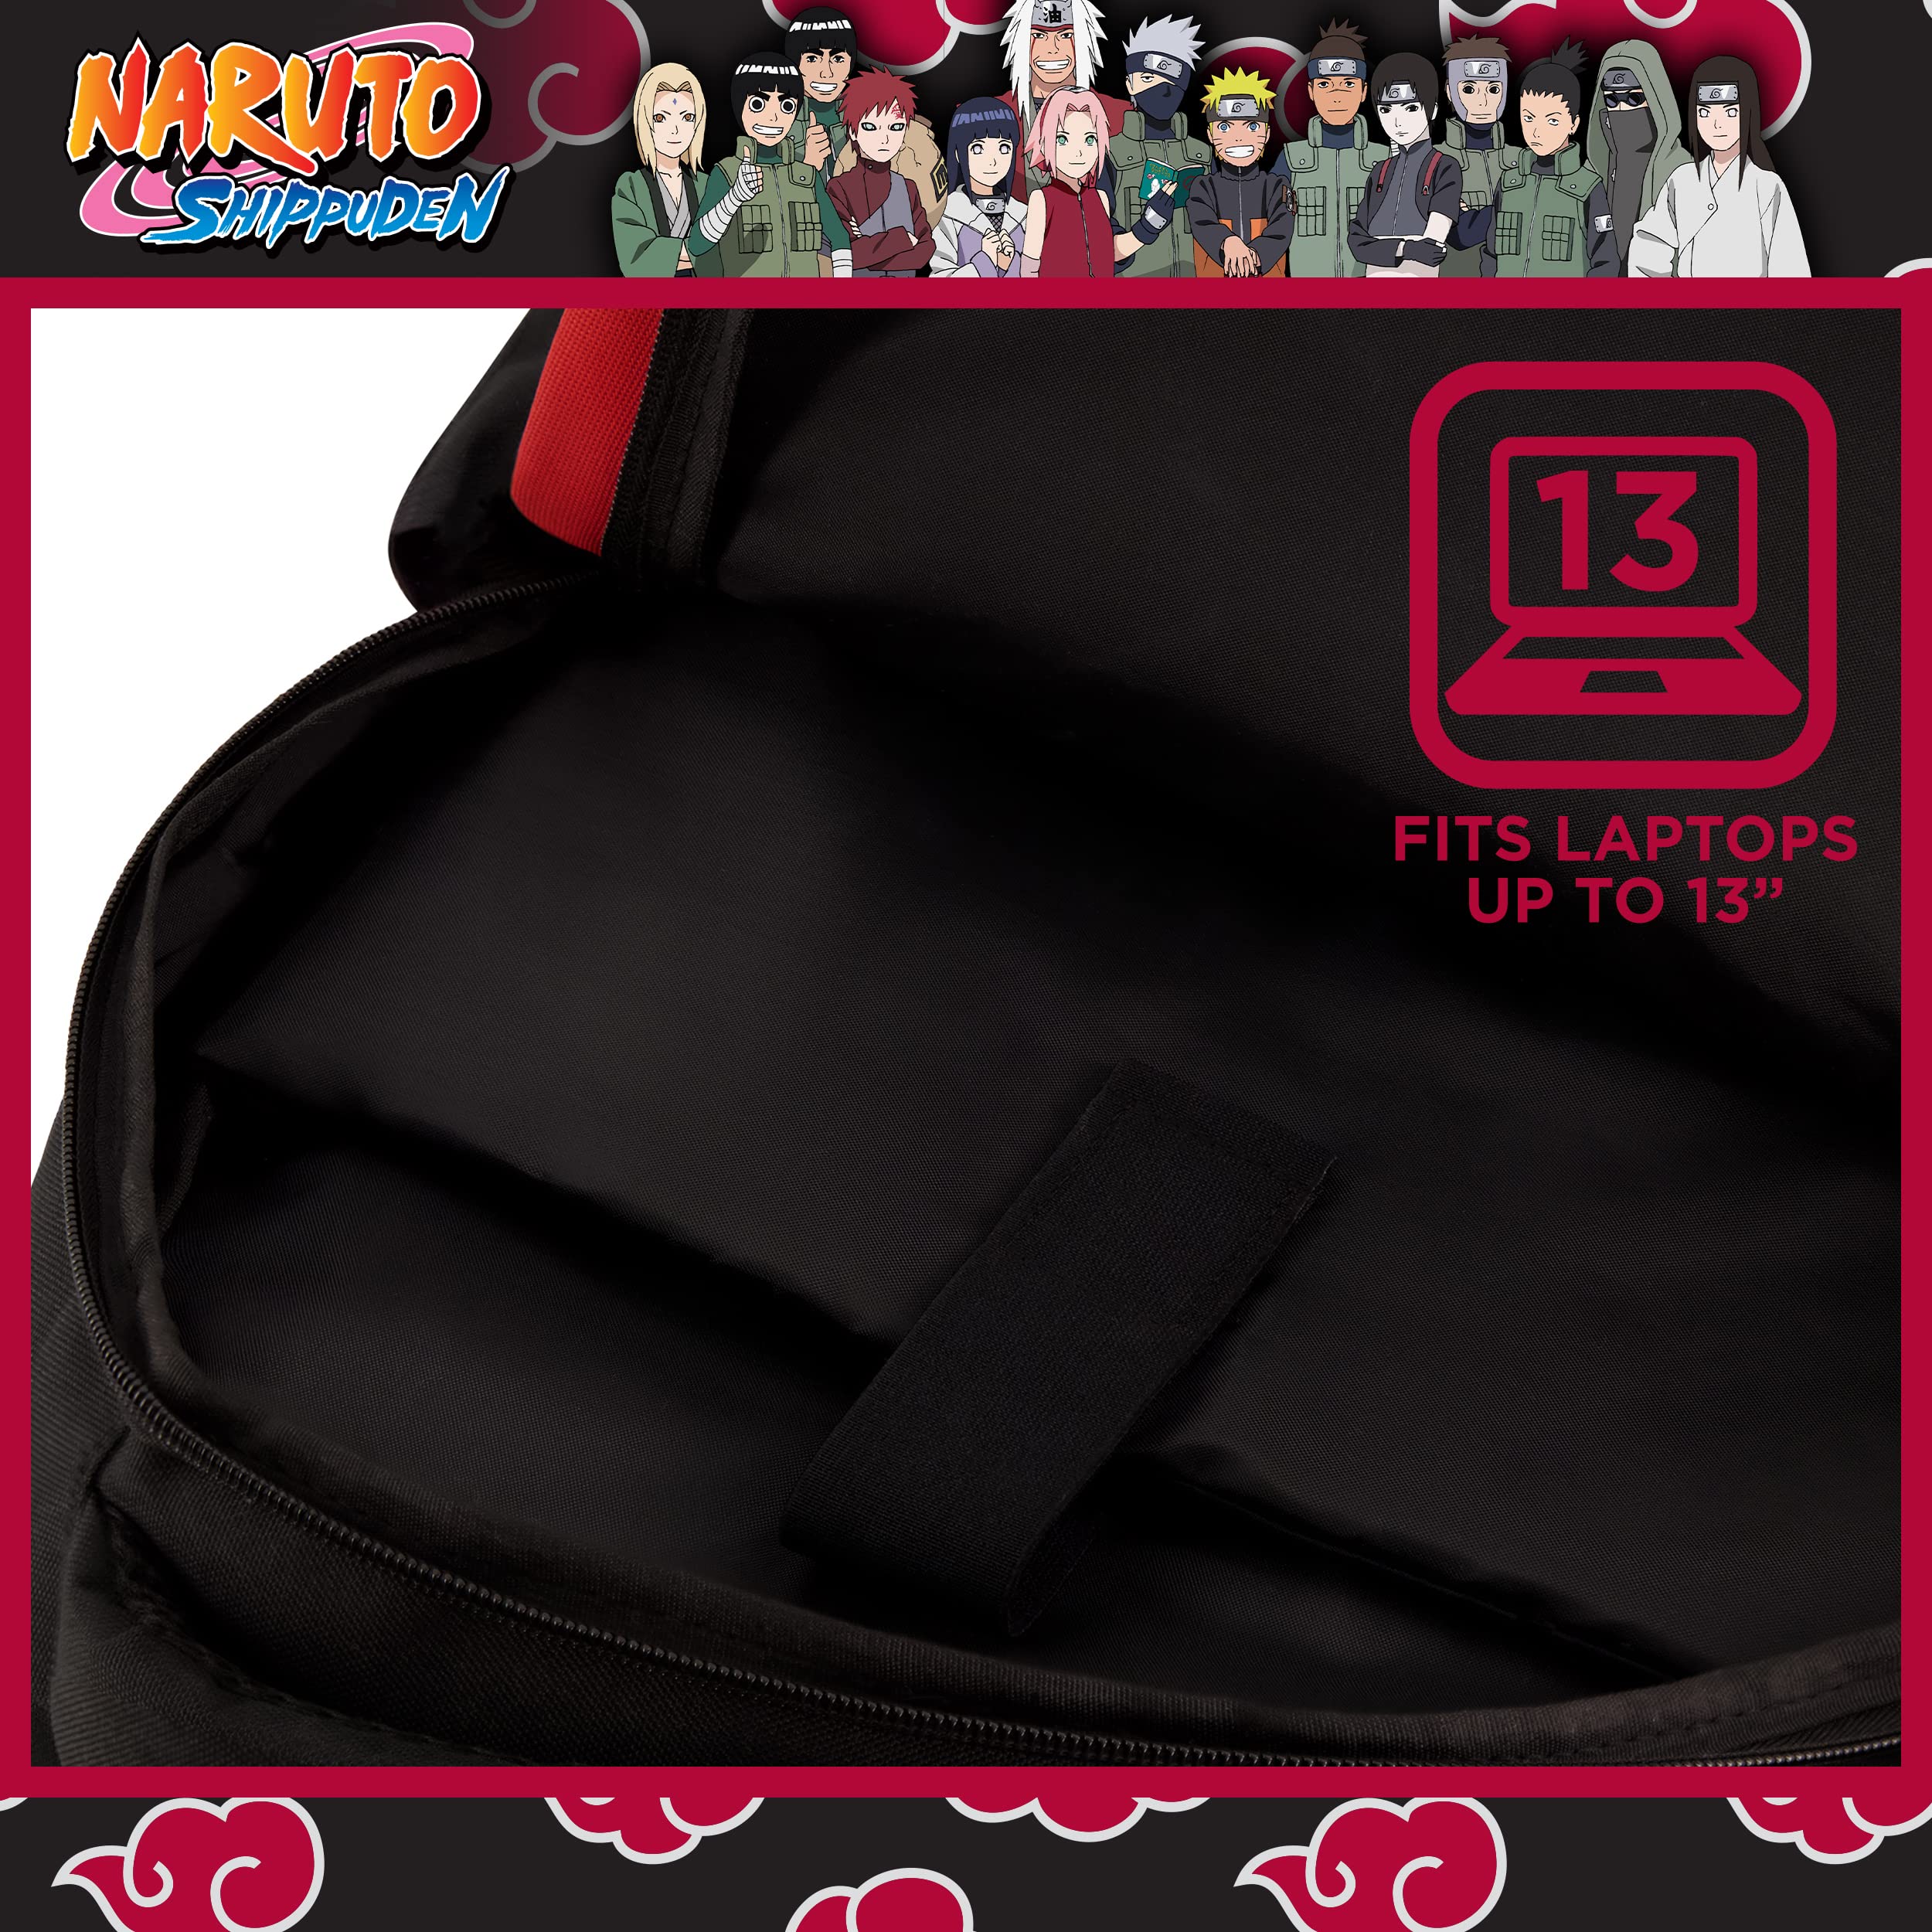 Naruto 15 Inch Sleeve Laptop Backpack, Padded Computer Bag for Commute or Travel, Team 7, One Size